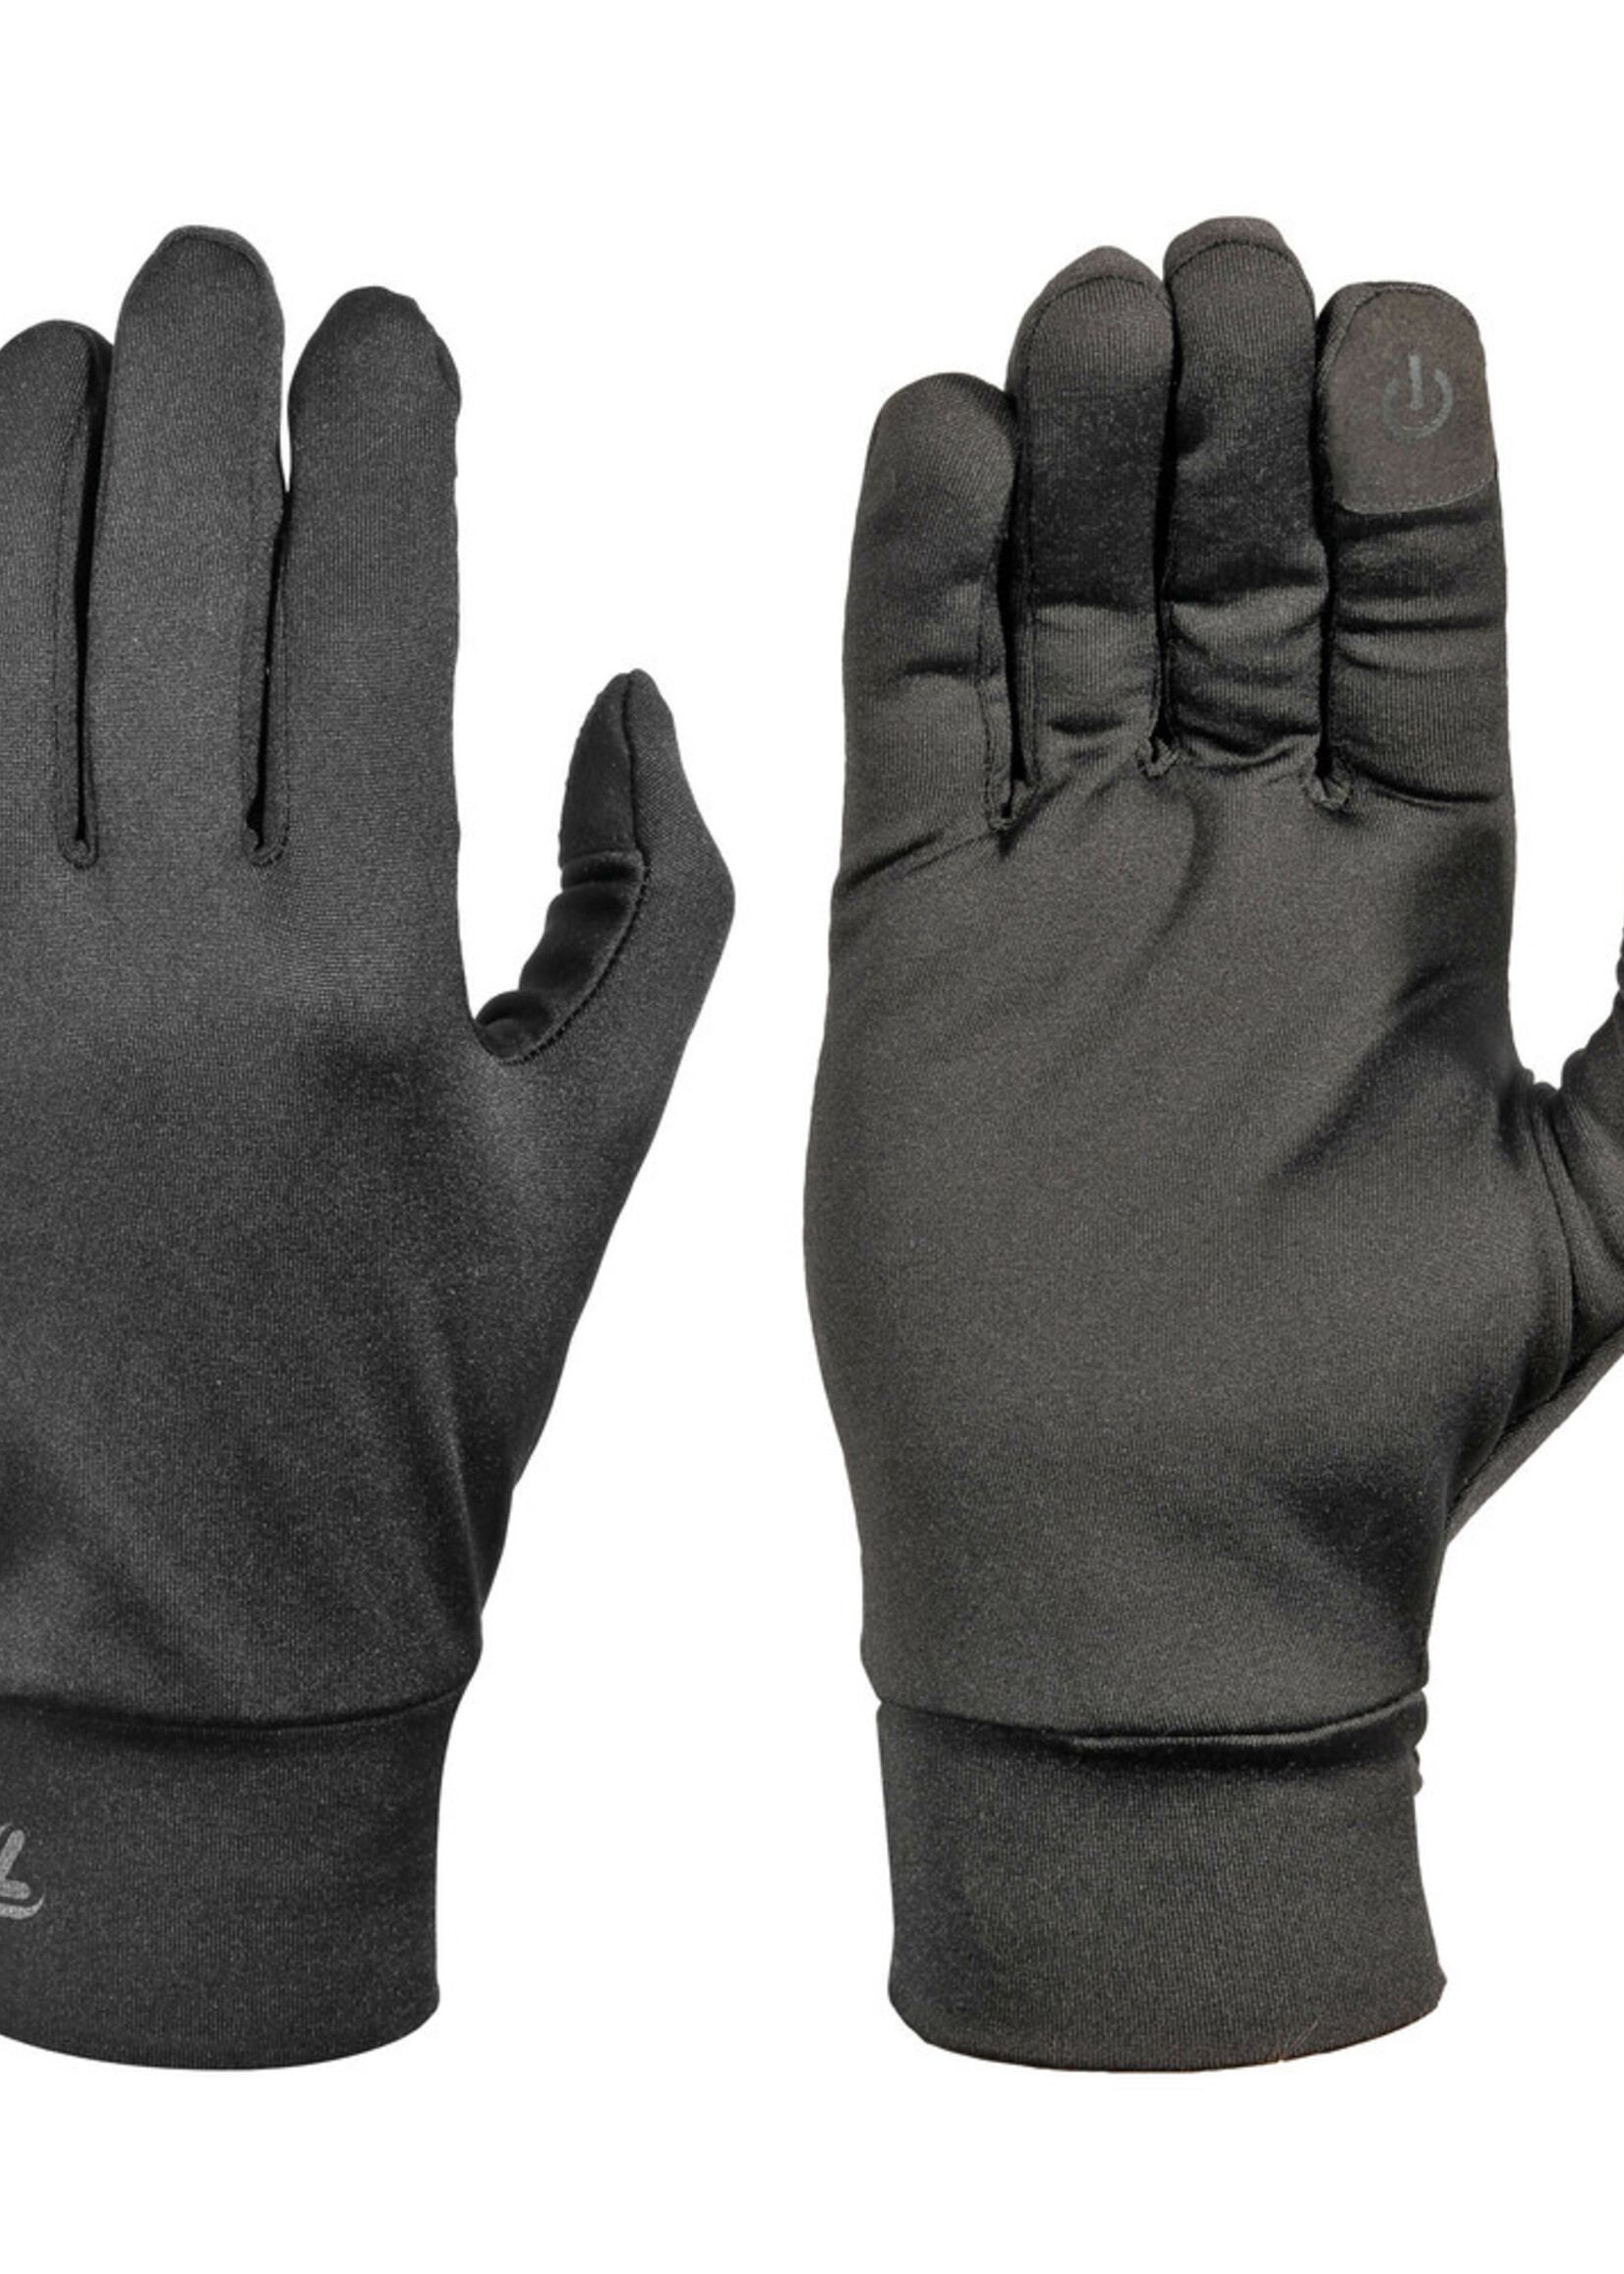 Lampa W-Touch, winter undergloves - M / L